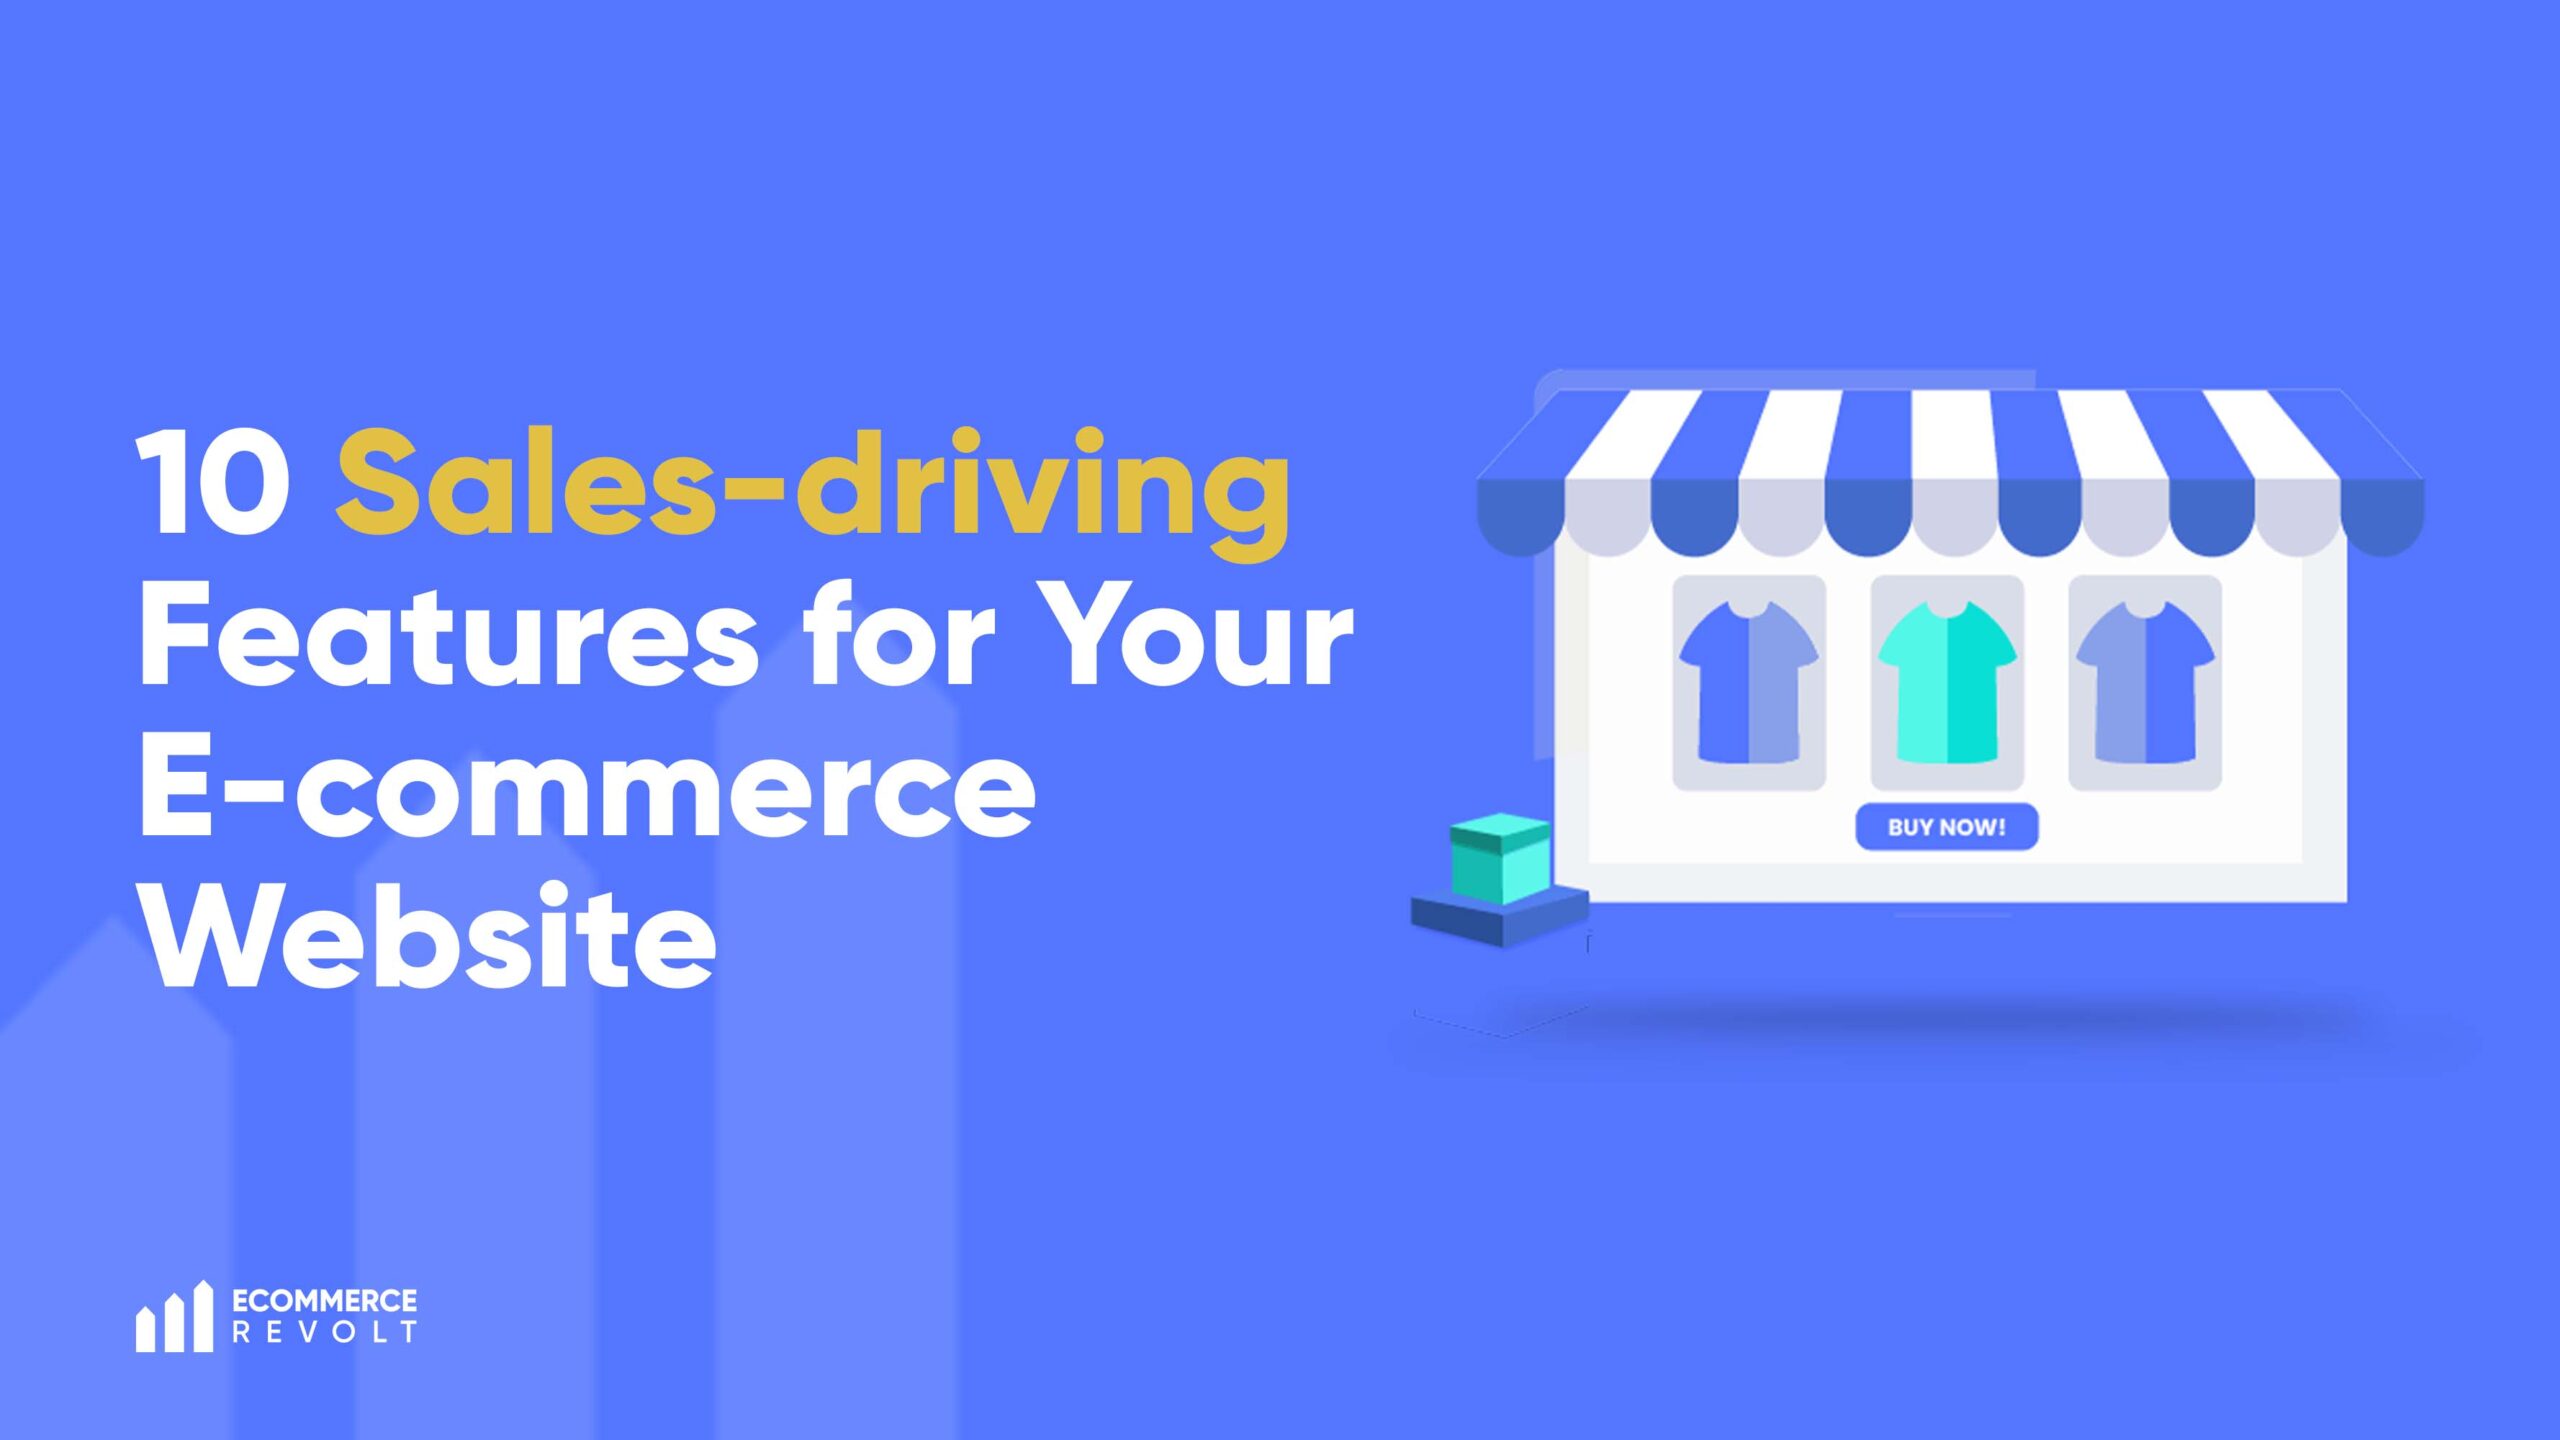 10 features for ecommerce sales driving